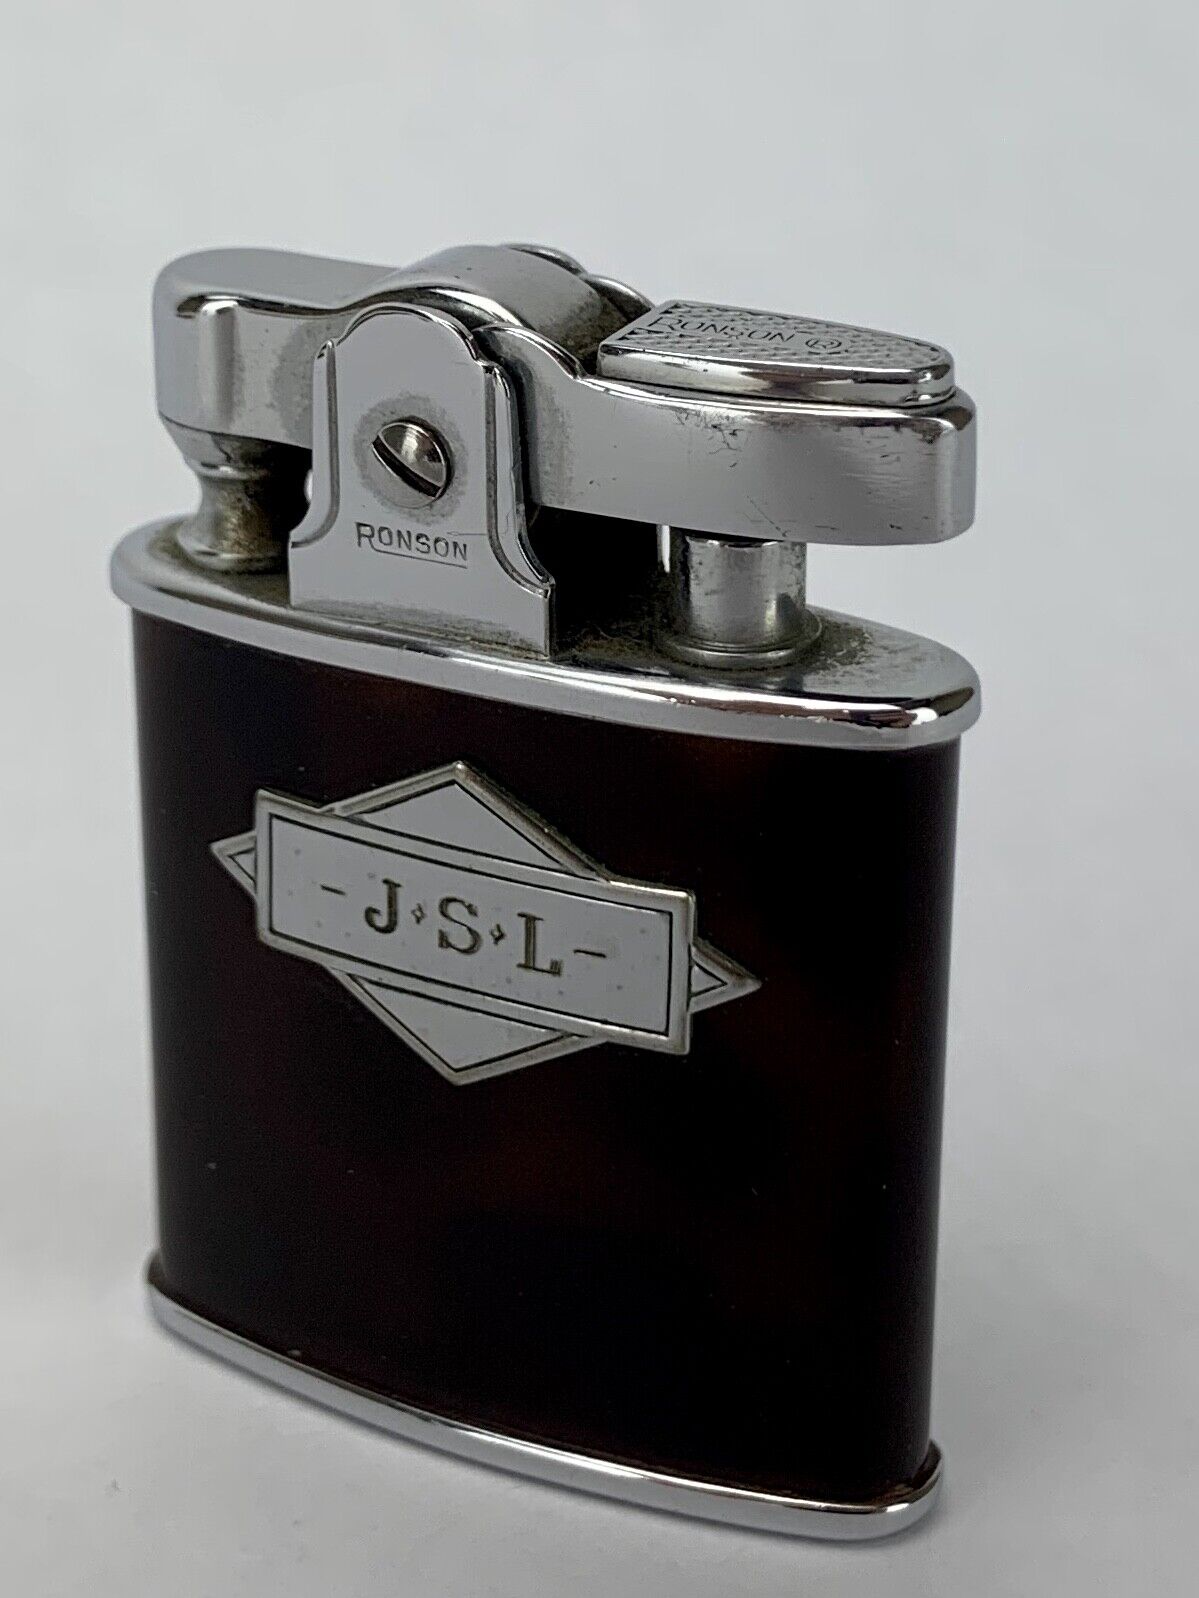 ronson classic lighters